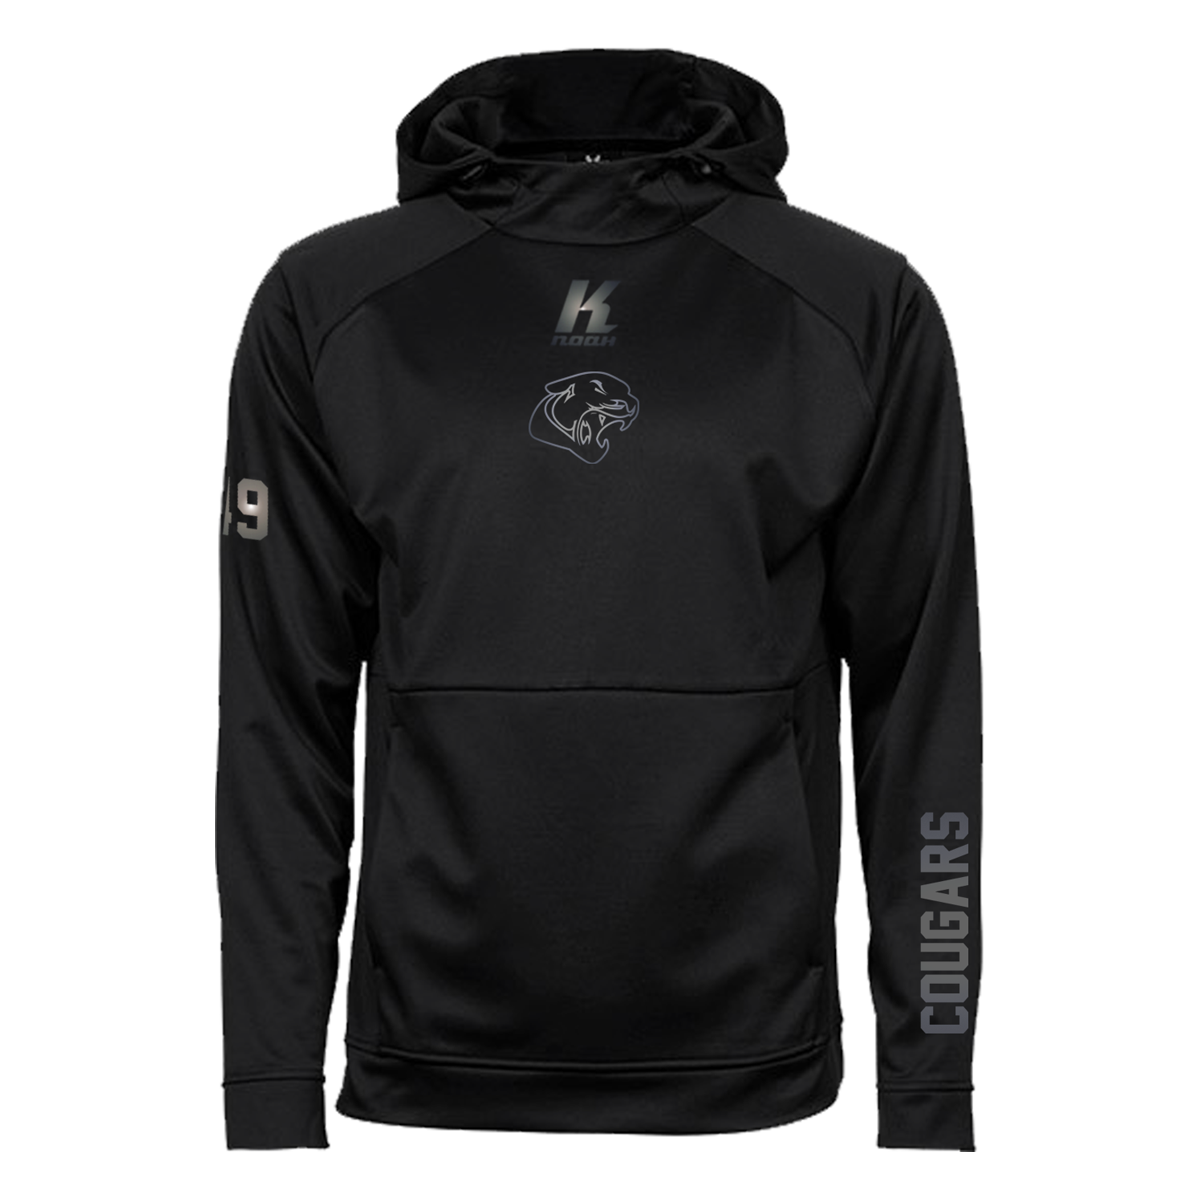 Cougars "Blackline" Performance Hoodie JH006 with Playernumber or Initials